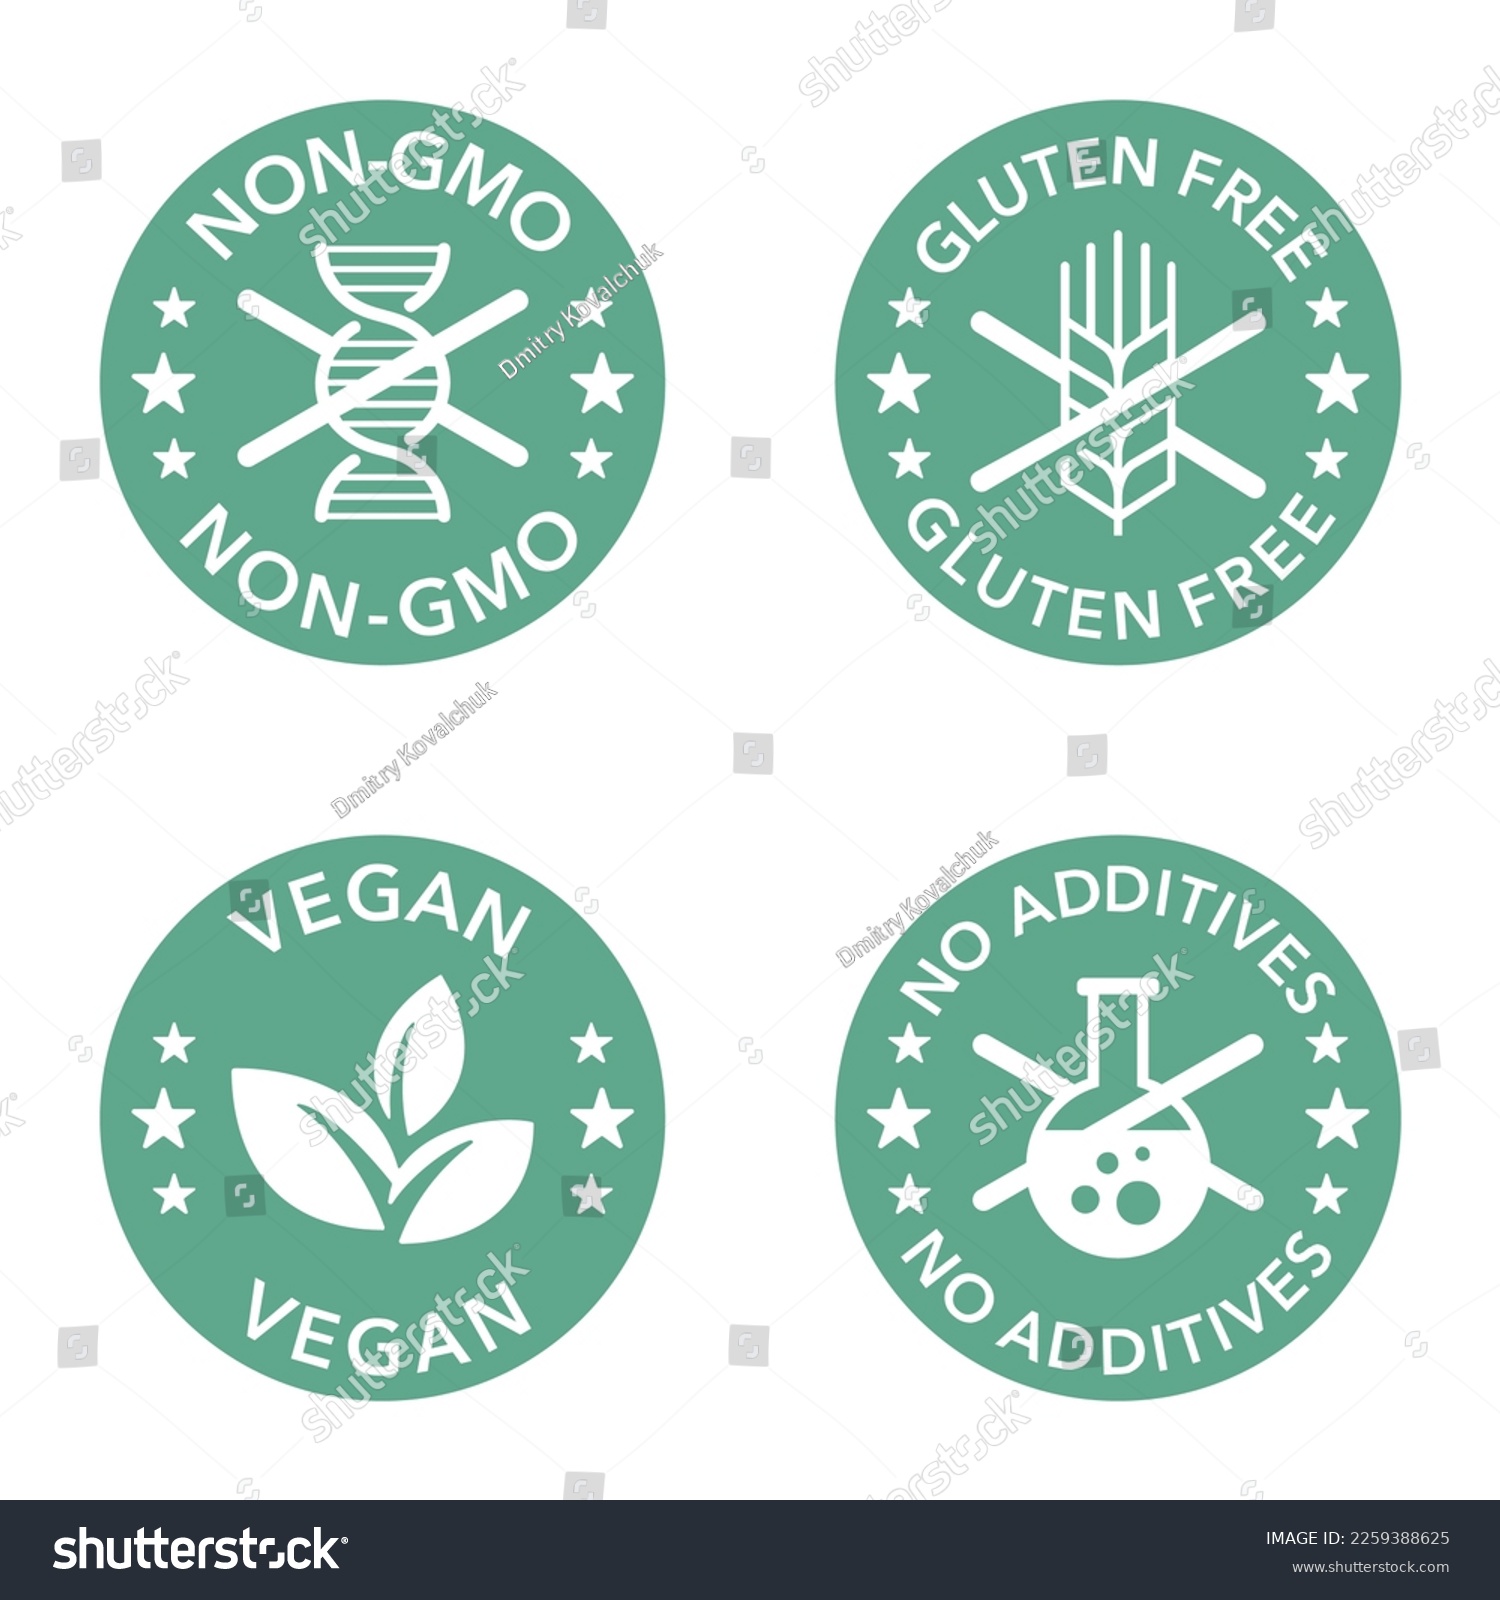 SVG of Vegan, Non-GMO, Gluten free and no additives - set of flat pictograms for food packaging. Decoration for healthy natural organic nutrition svg